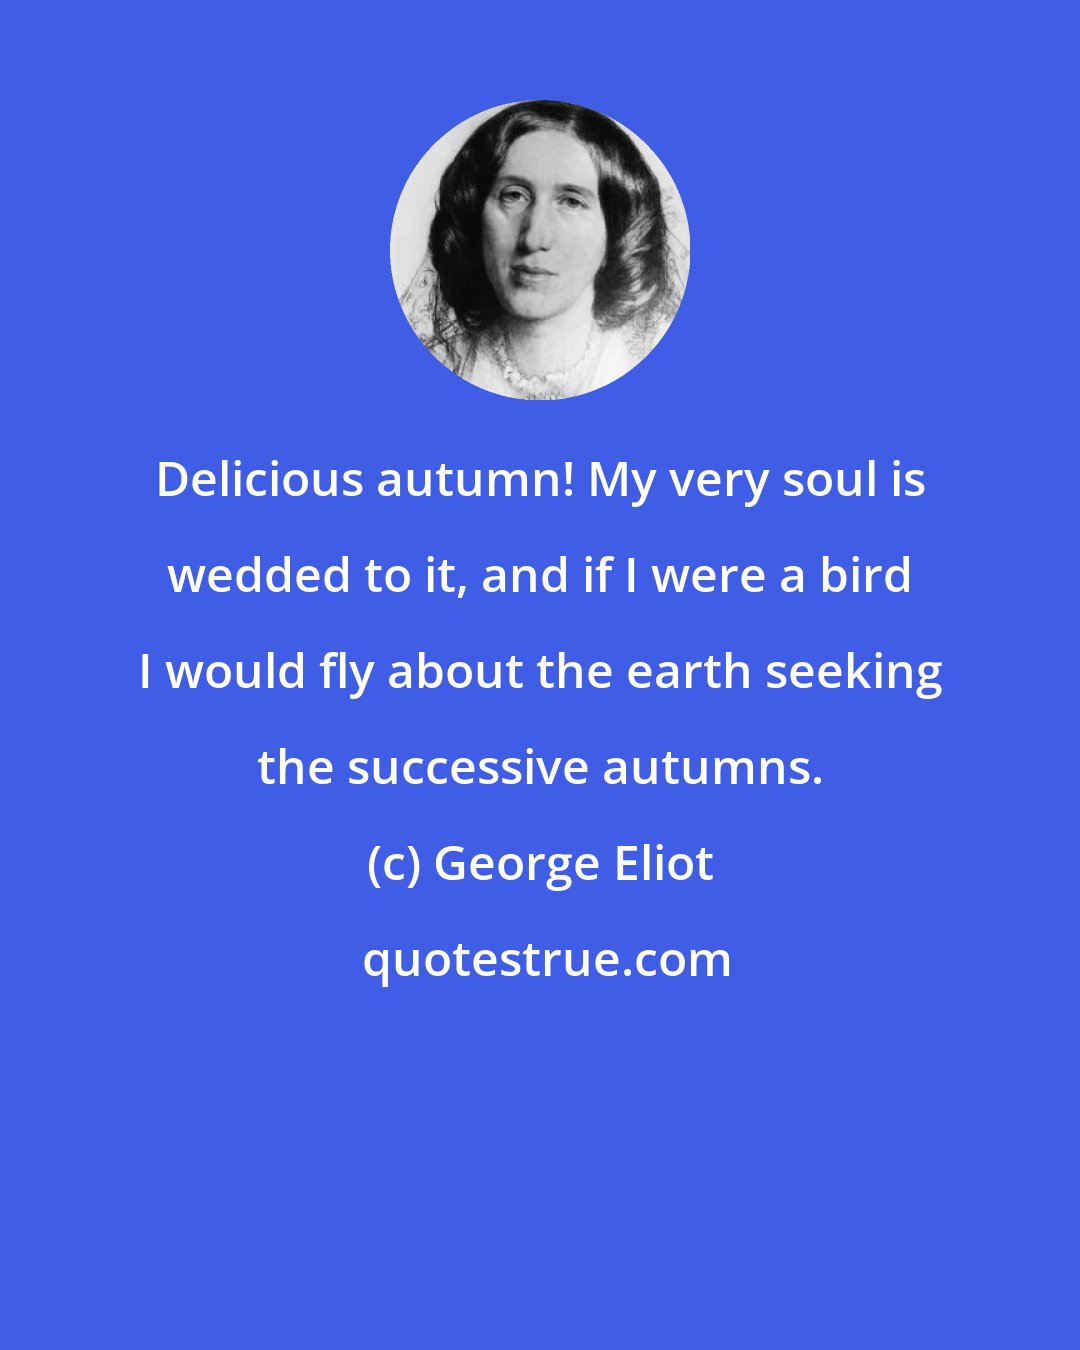 George Eliot: Delicious autumn! My very soul is wedded to it, and if I were a bird I would fly about the earth seeking the successive autumns.